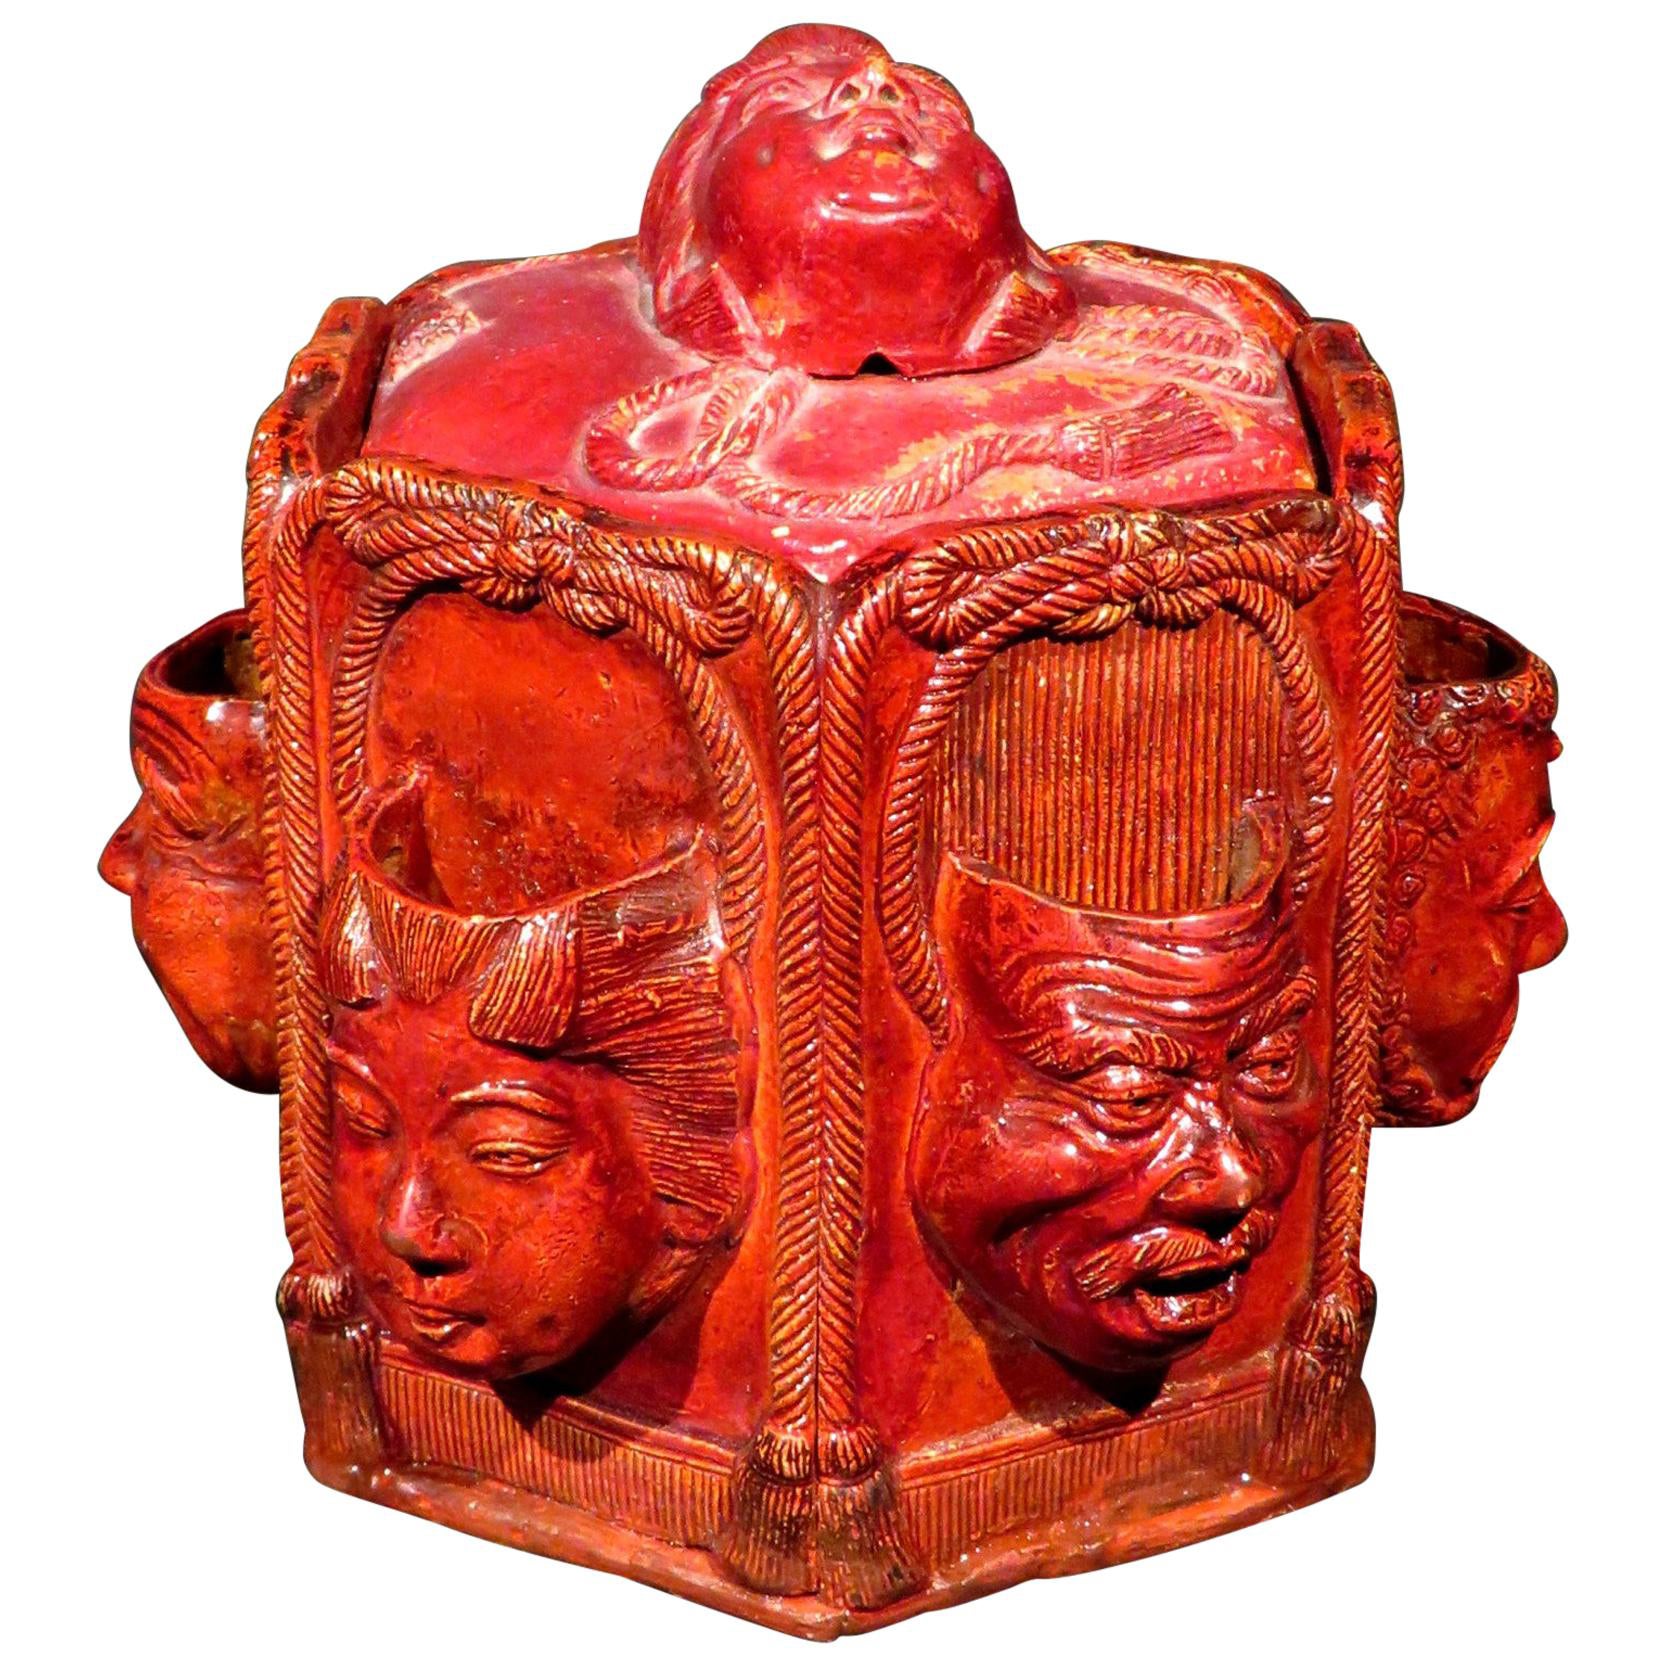 Unique & Highly Decorative Oriental Inspired Humidor, Continental, circa 1920